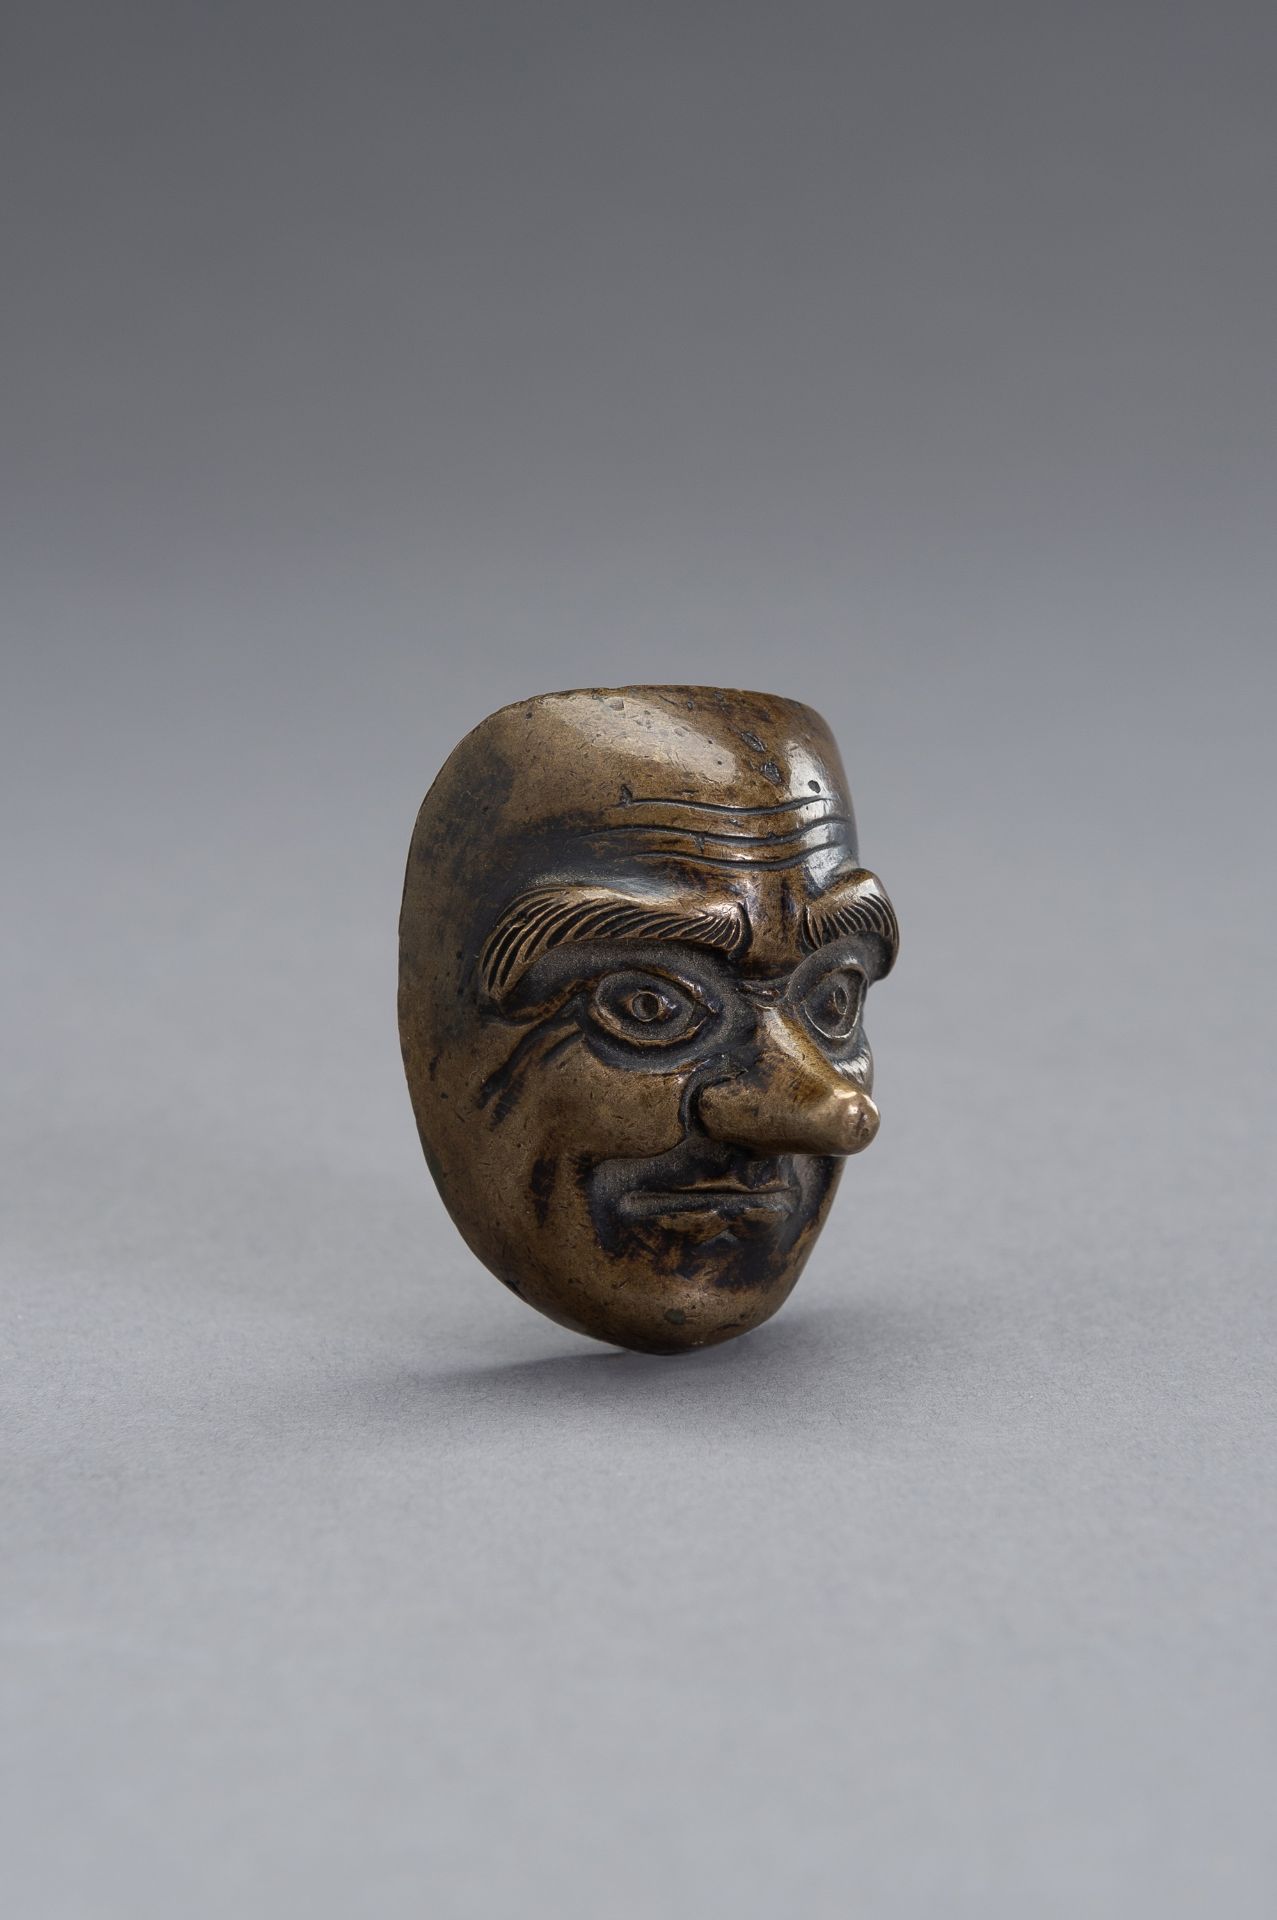 A BRONZE SCROLL WEIGHT IN THE SHAPE OF A NOH MASK